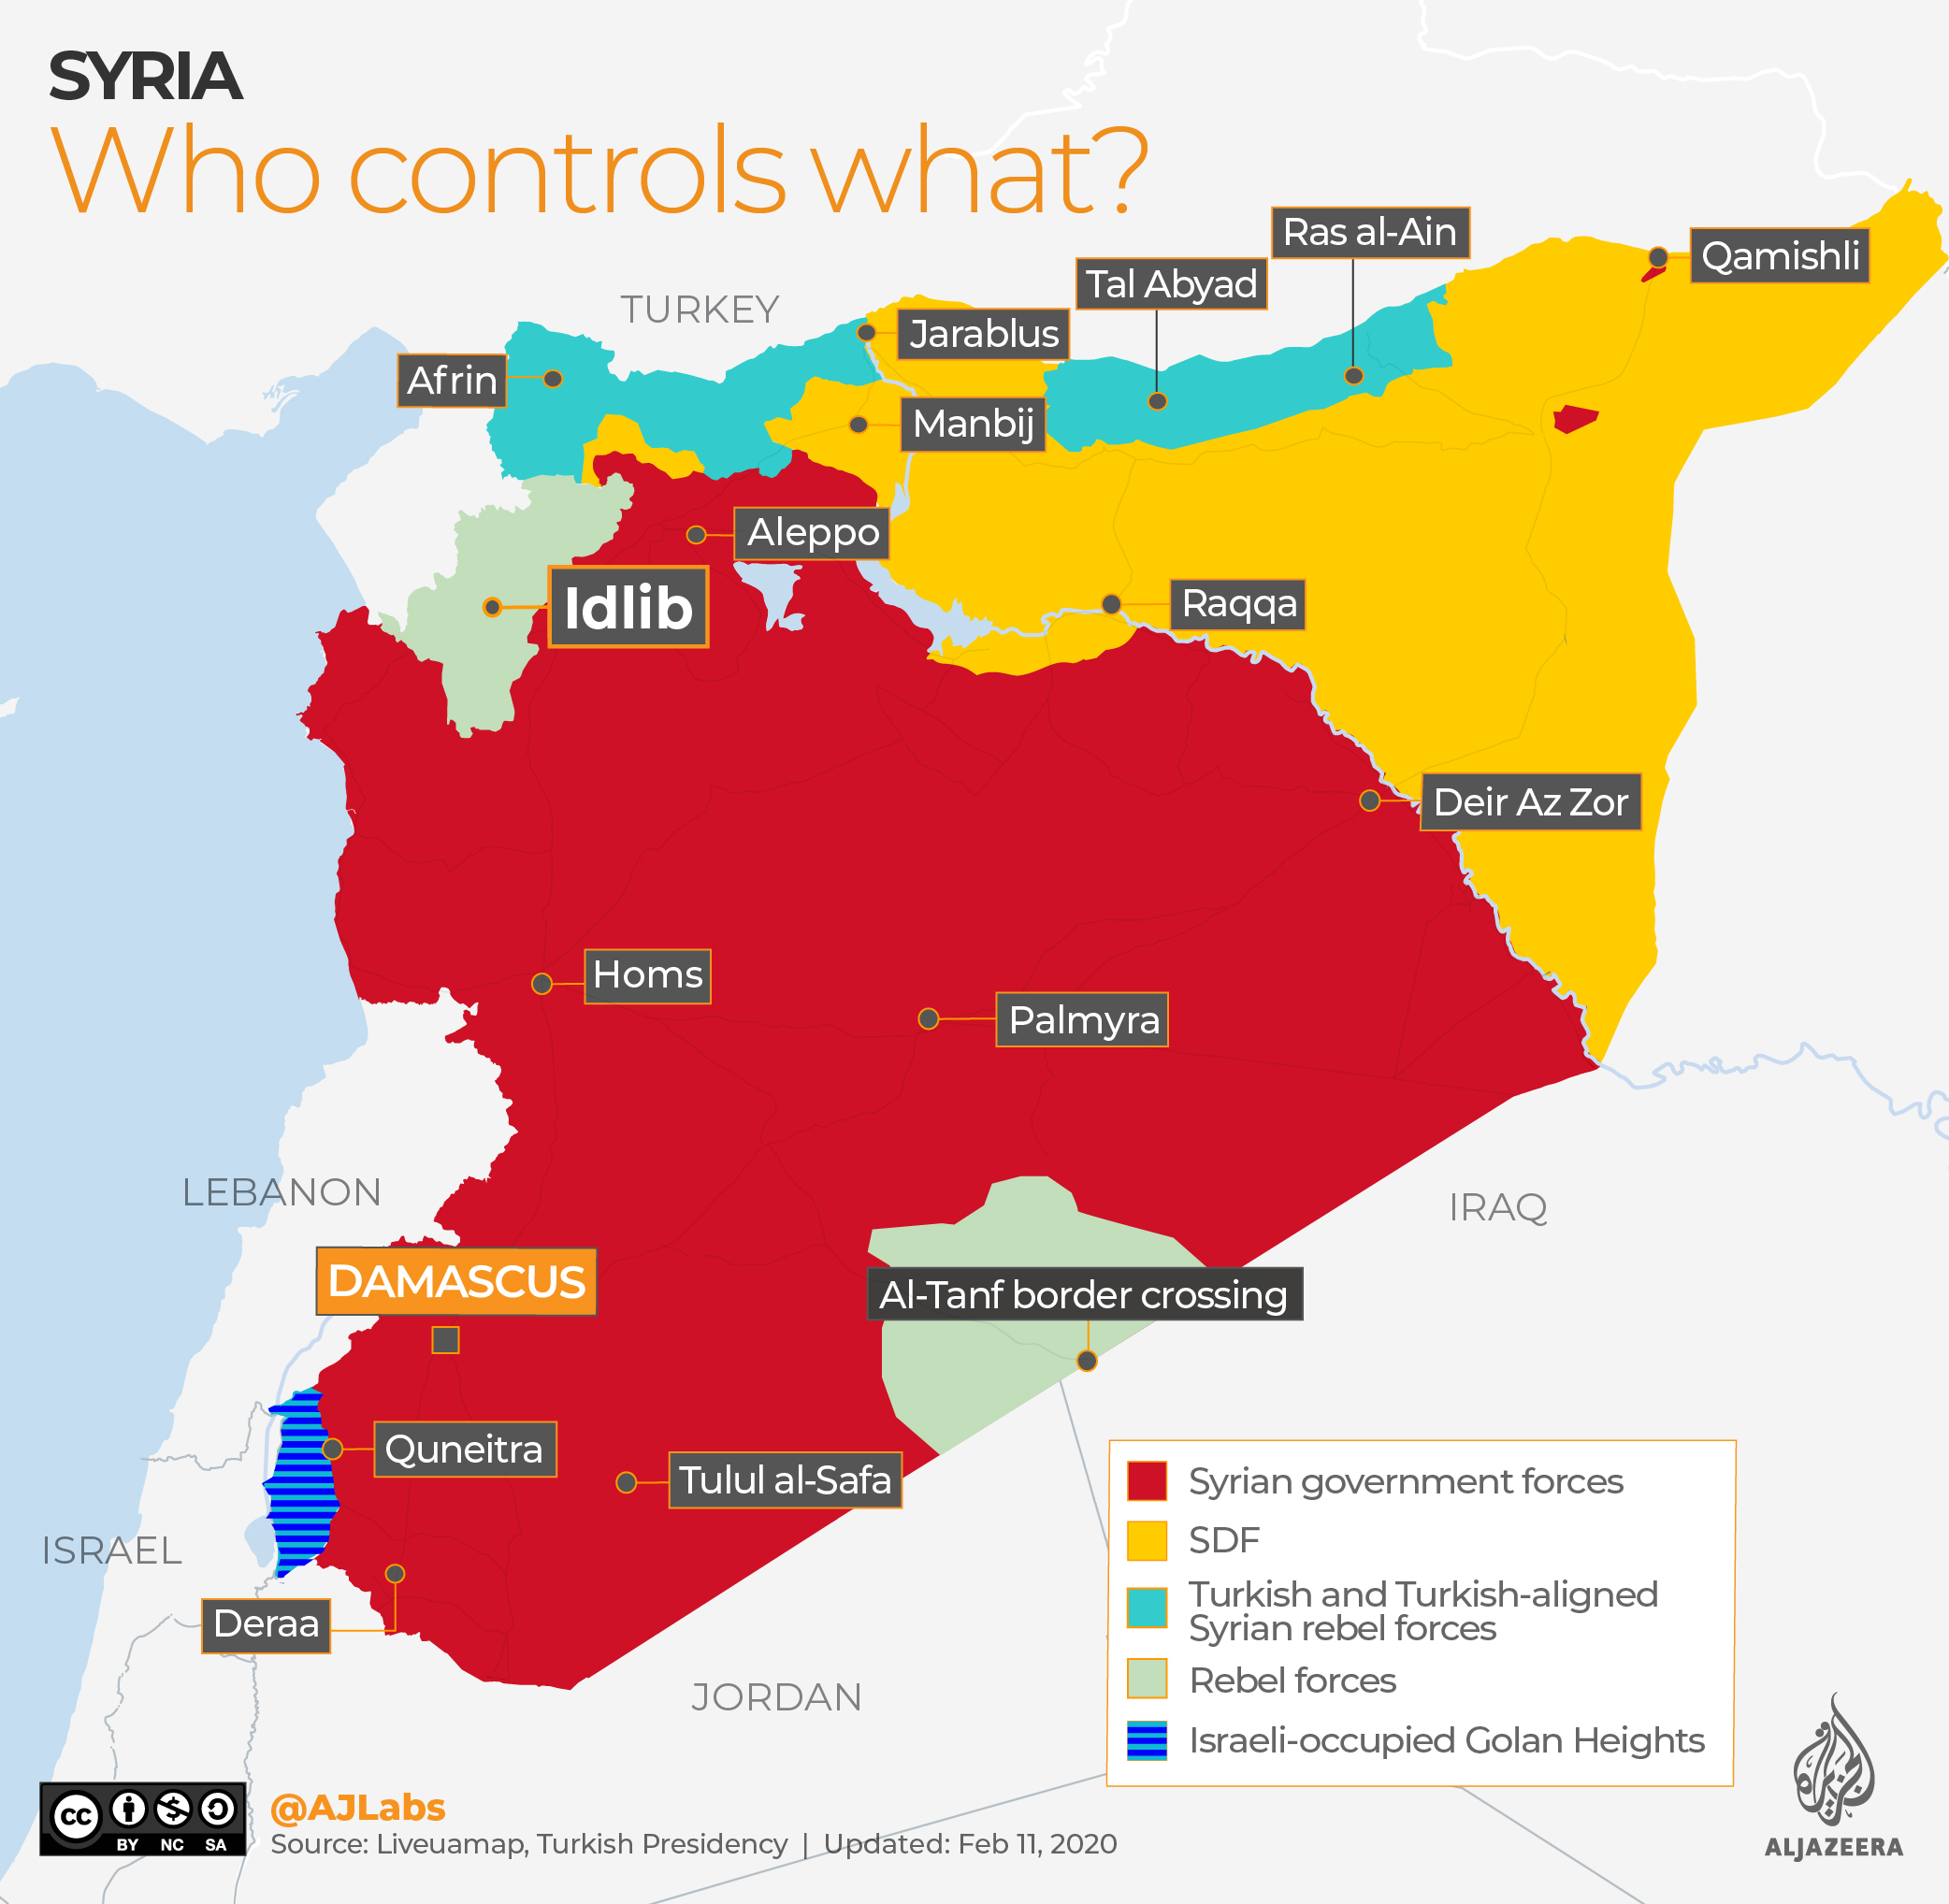 Baby Health in Winter INTERACTIVE: Syria Who controls what map - FEB 11 2020